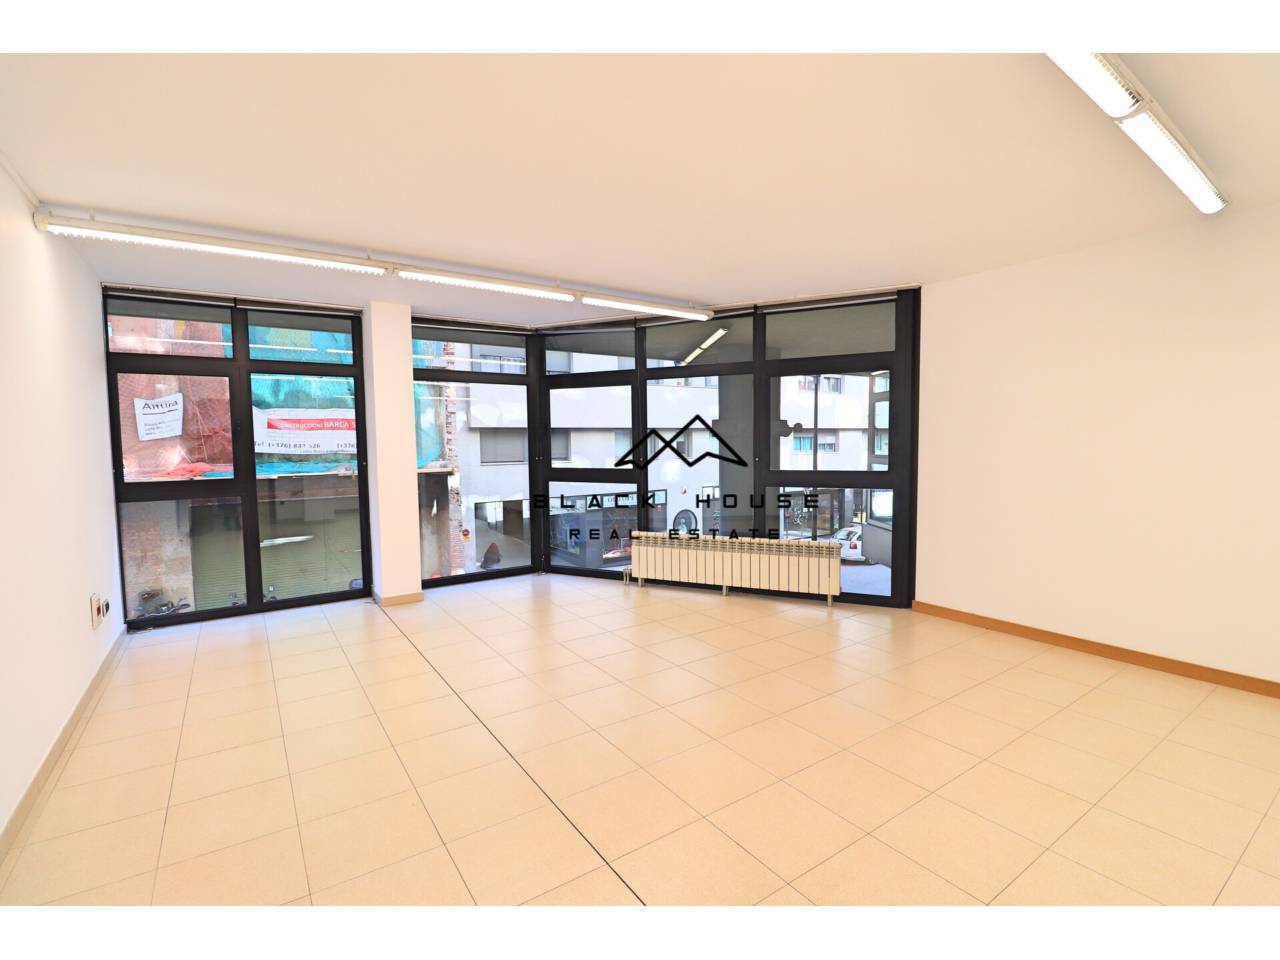 Office for rent in the center of Andorra la Vella